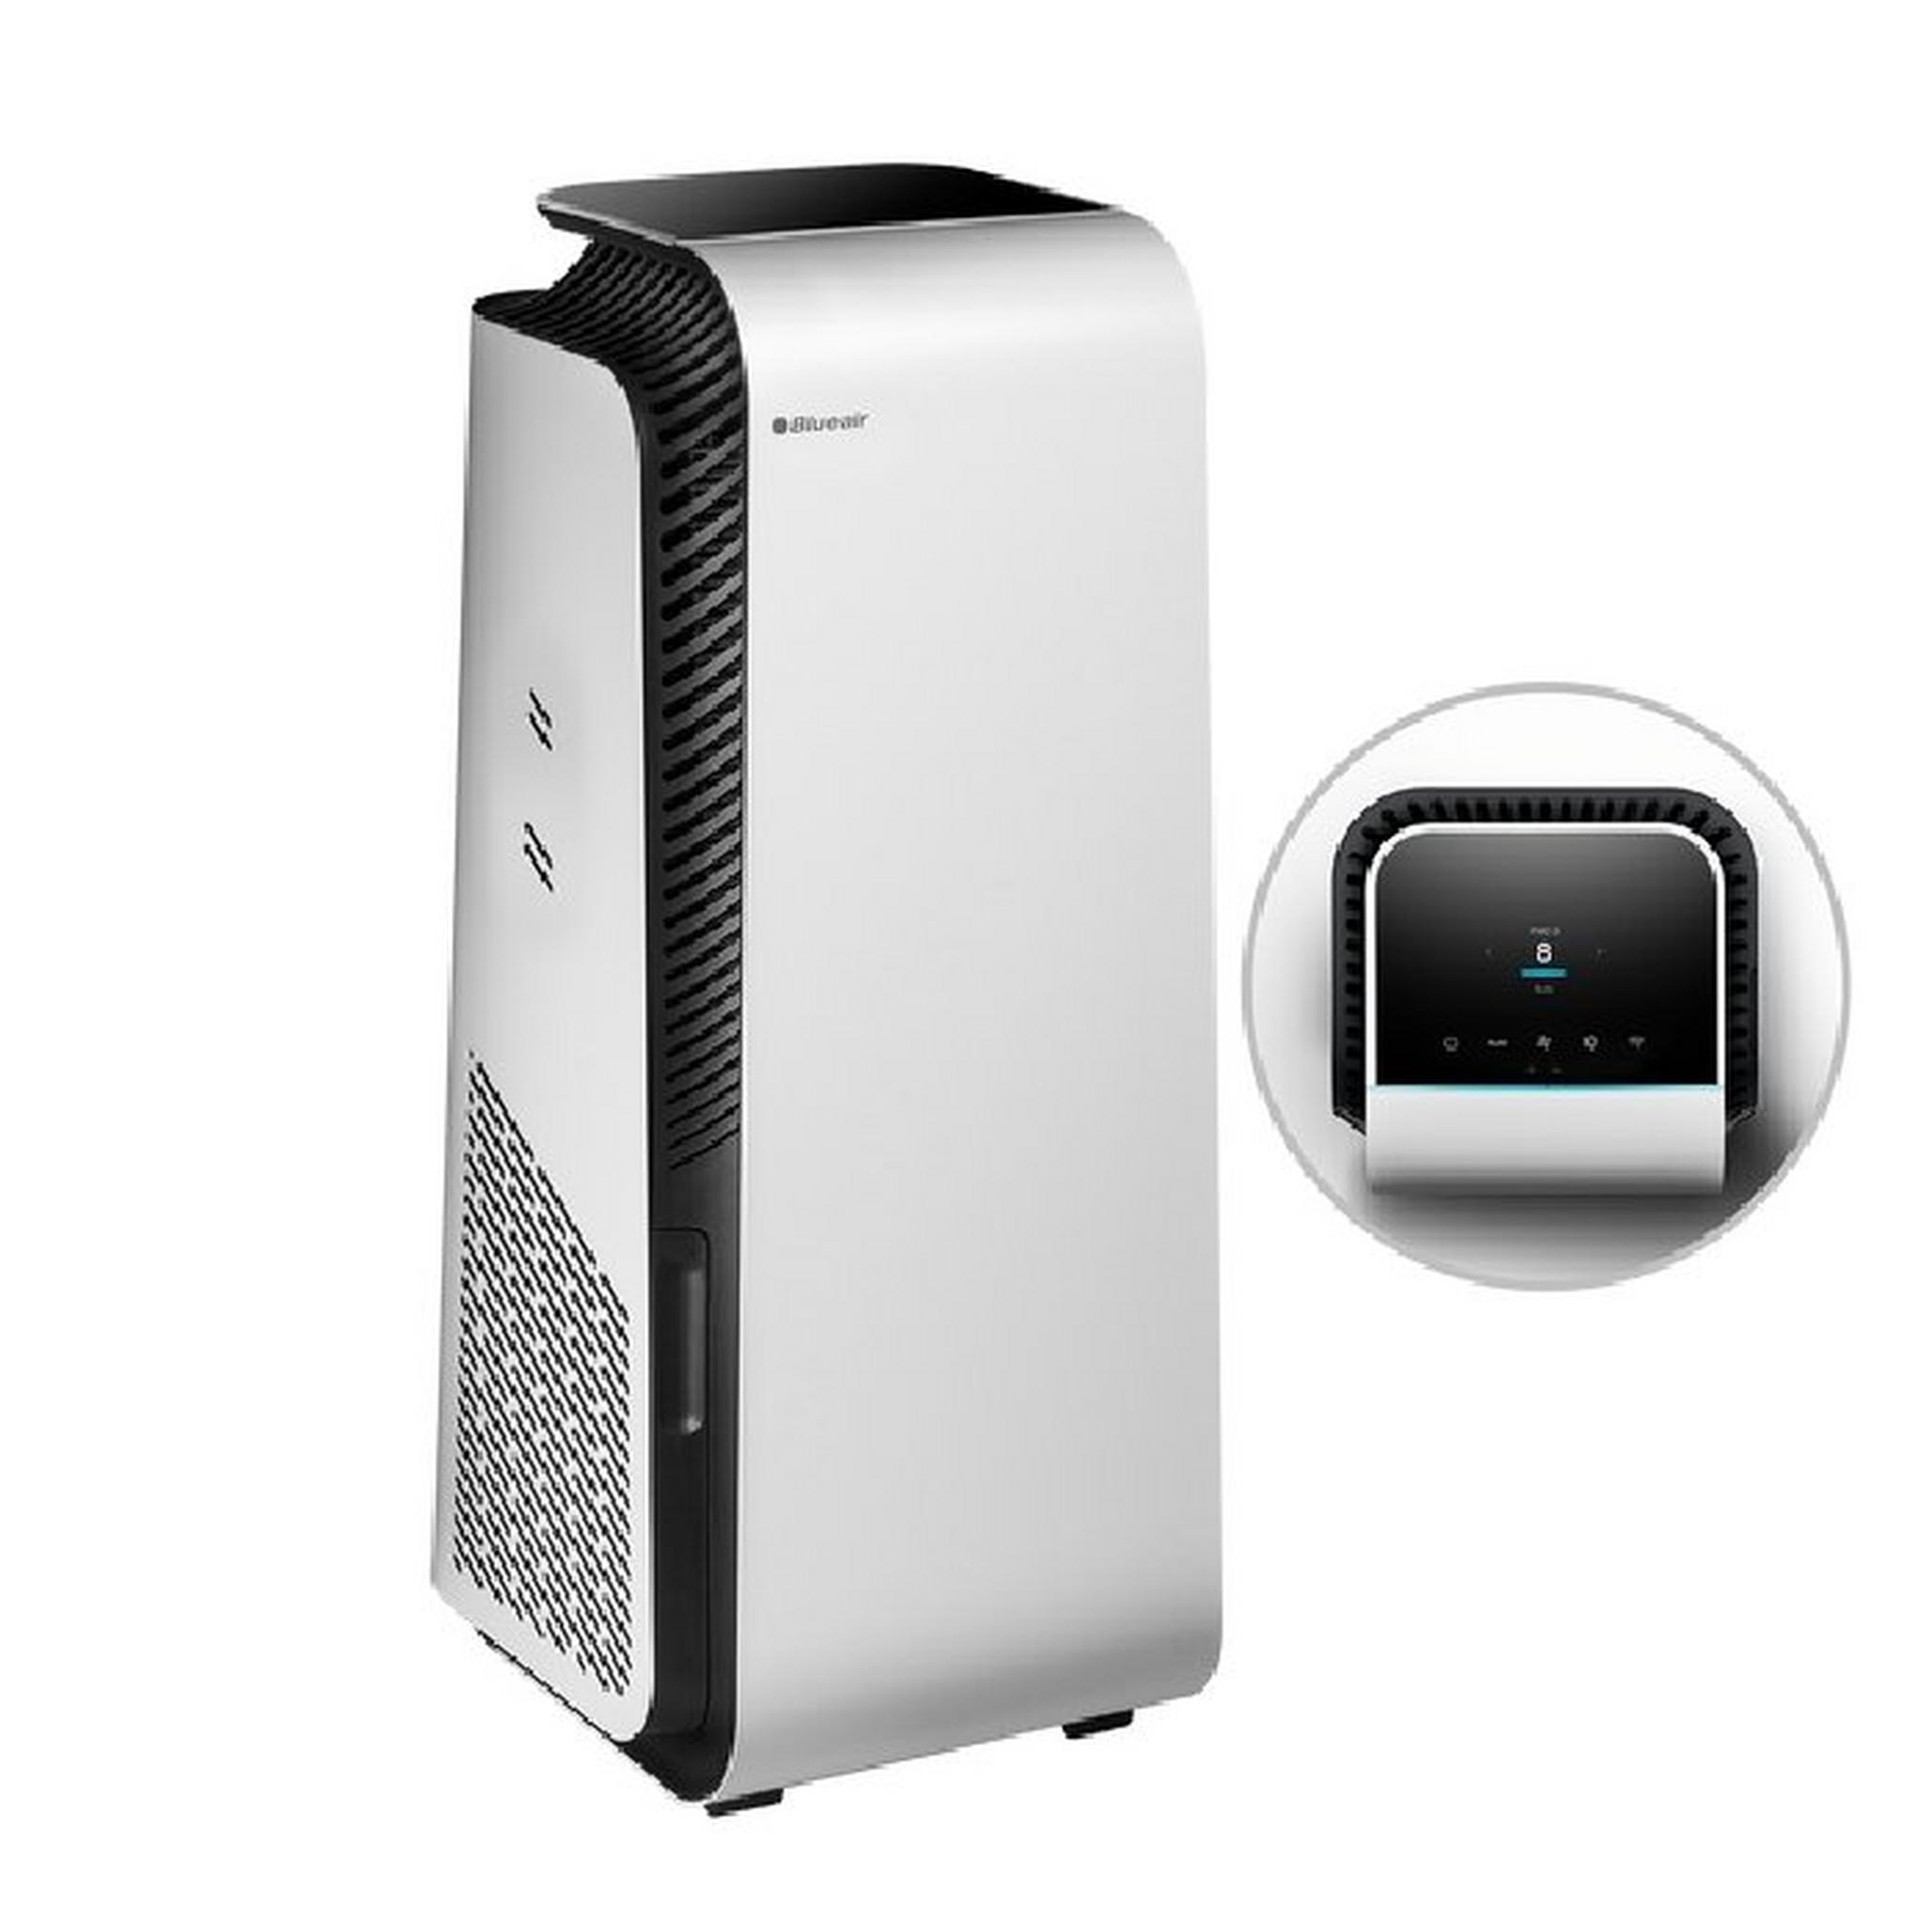 Blueair HealthProtect 7470i Air Purifier with SmartFilter